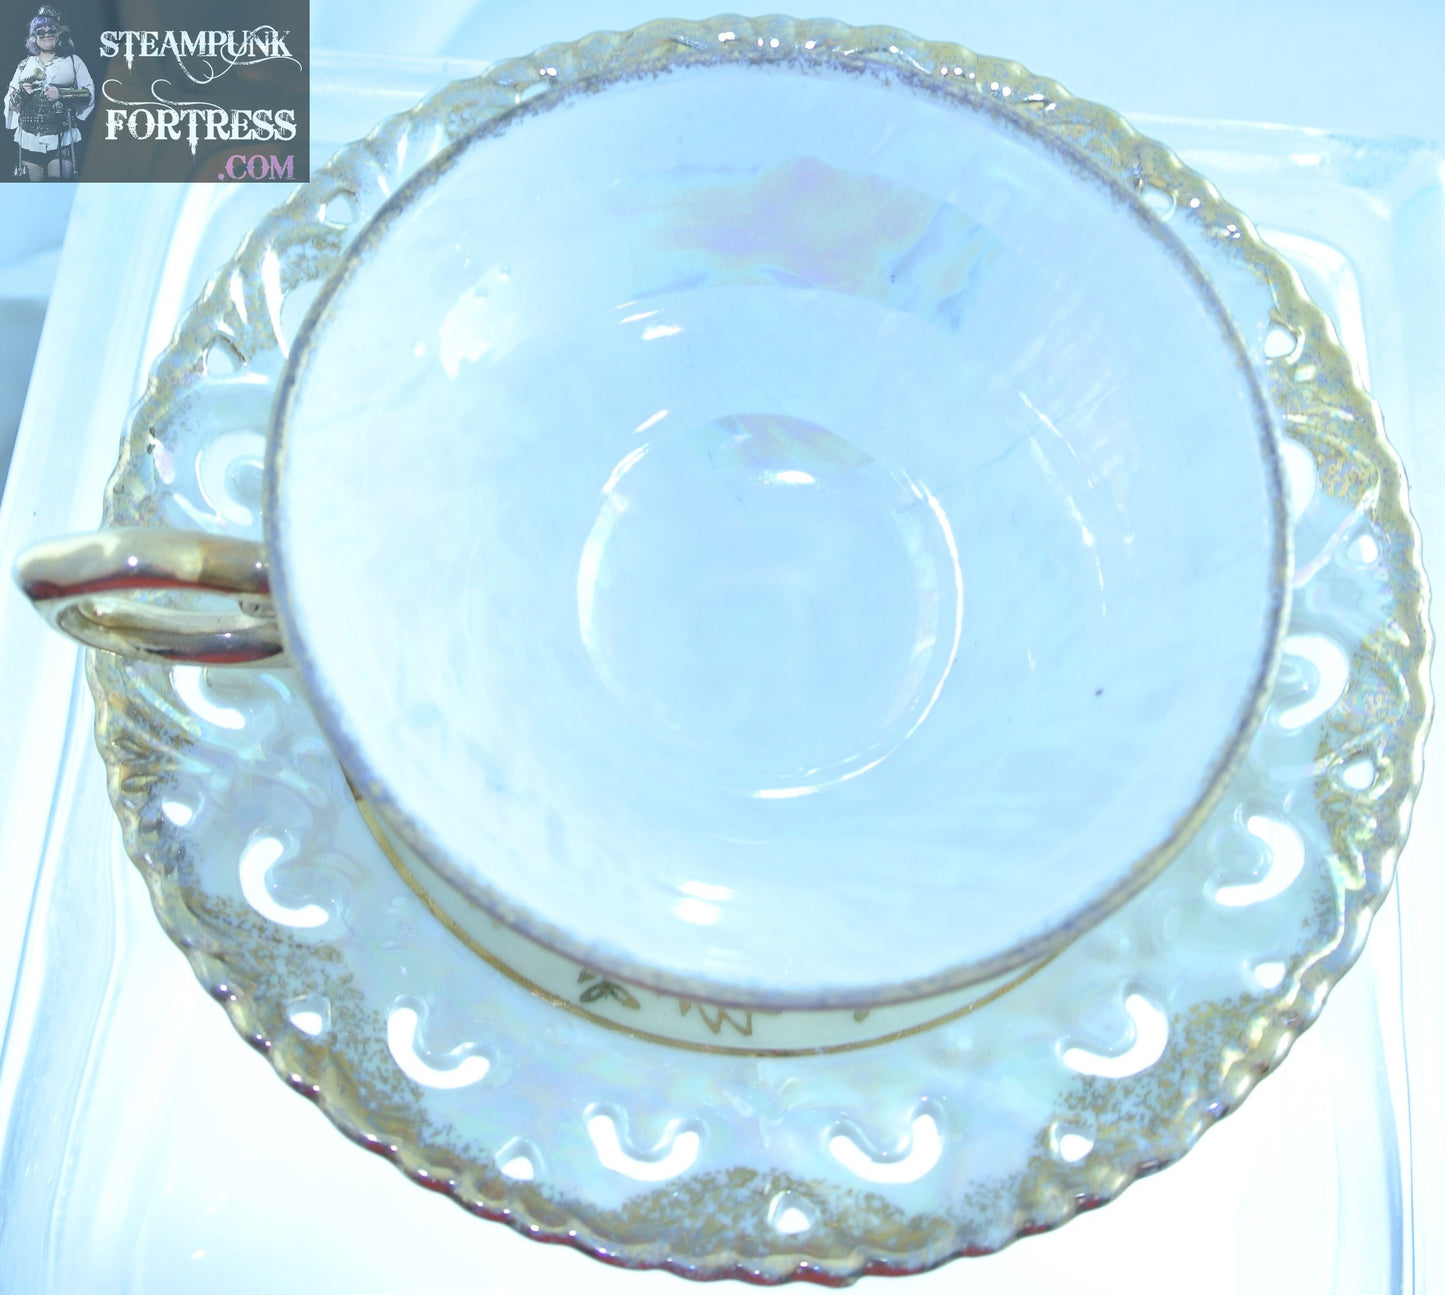 VINTAGE YAMATO TEACUP TEA CUP SET PLATE SAUCER LUSTERWARE GOLD WHITE FOOTED